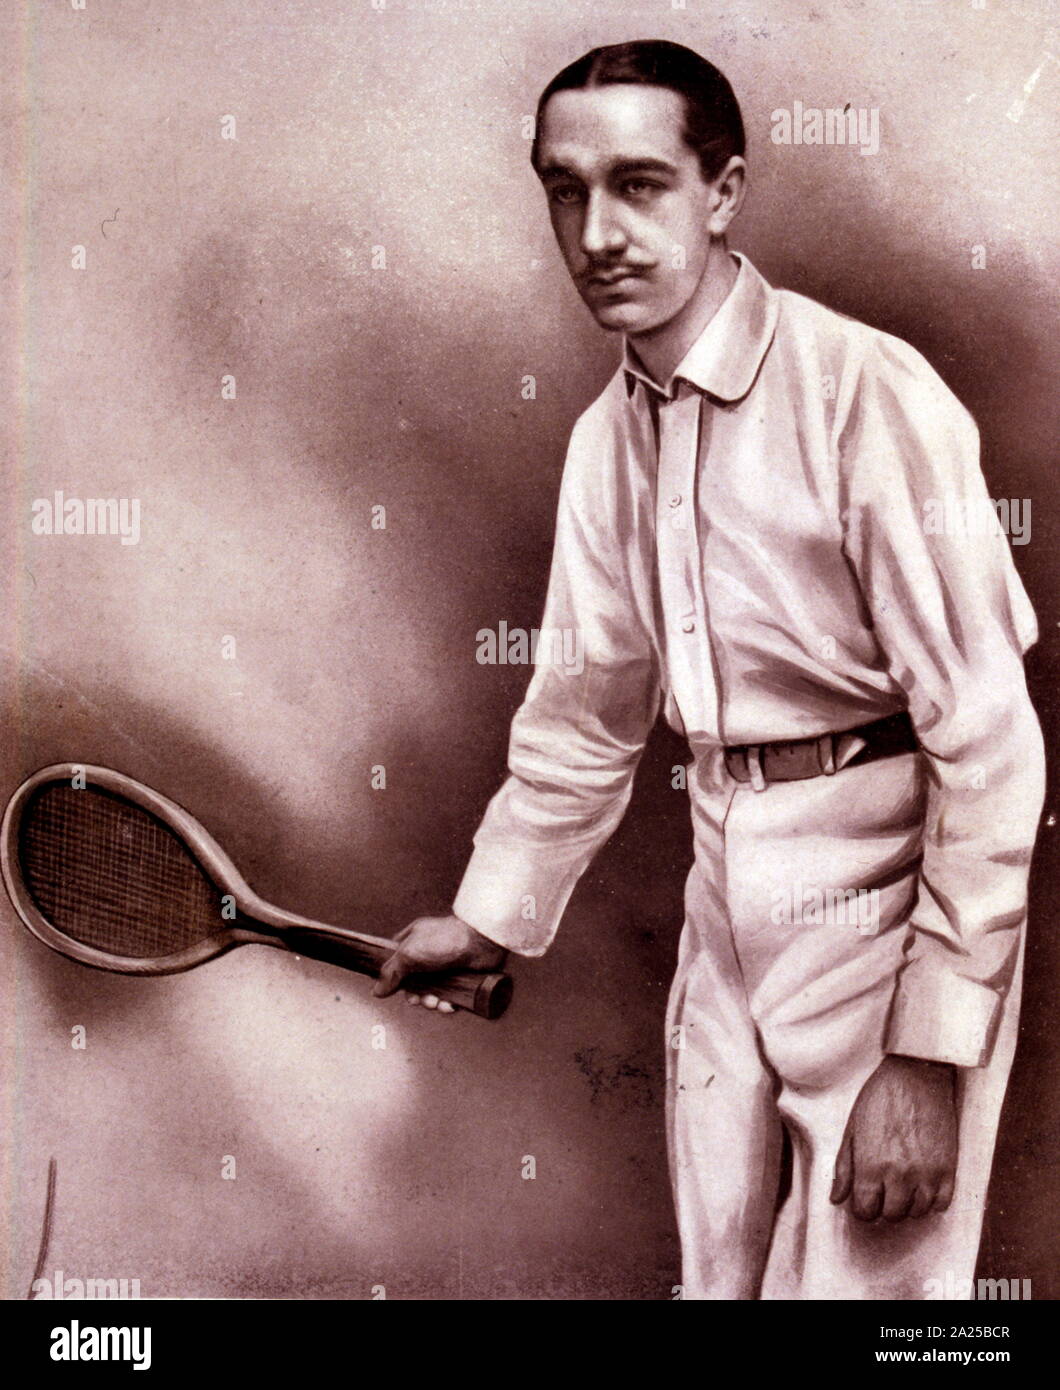 Maxime 'Max' Omer Mathieu Decugis, (1882 – 1978), tennis player from France who held the French Championships/French Open record of winning the tournament eight times (a French club members only tournament before 1925) Stock Photo